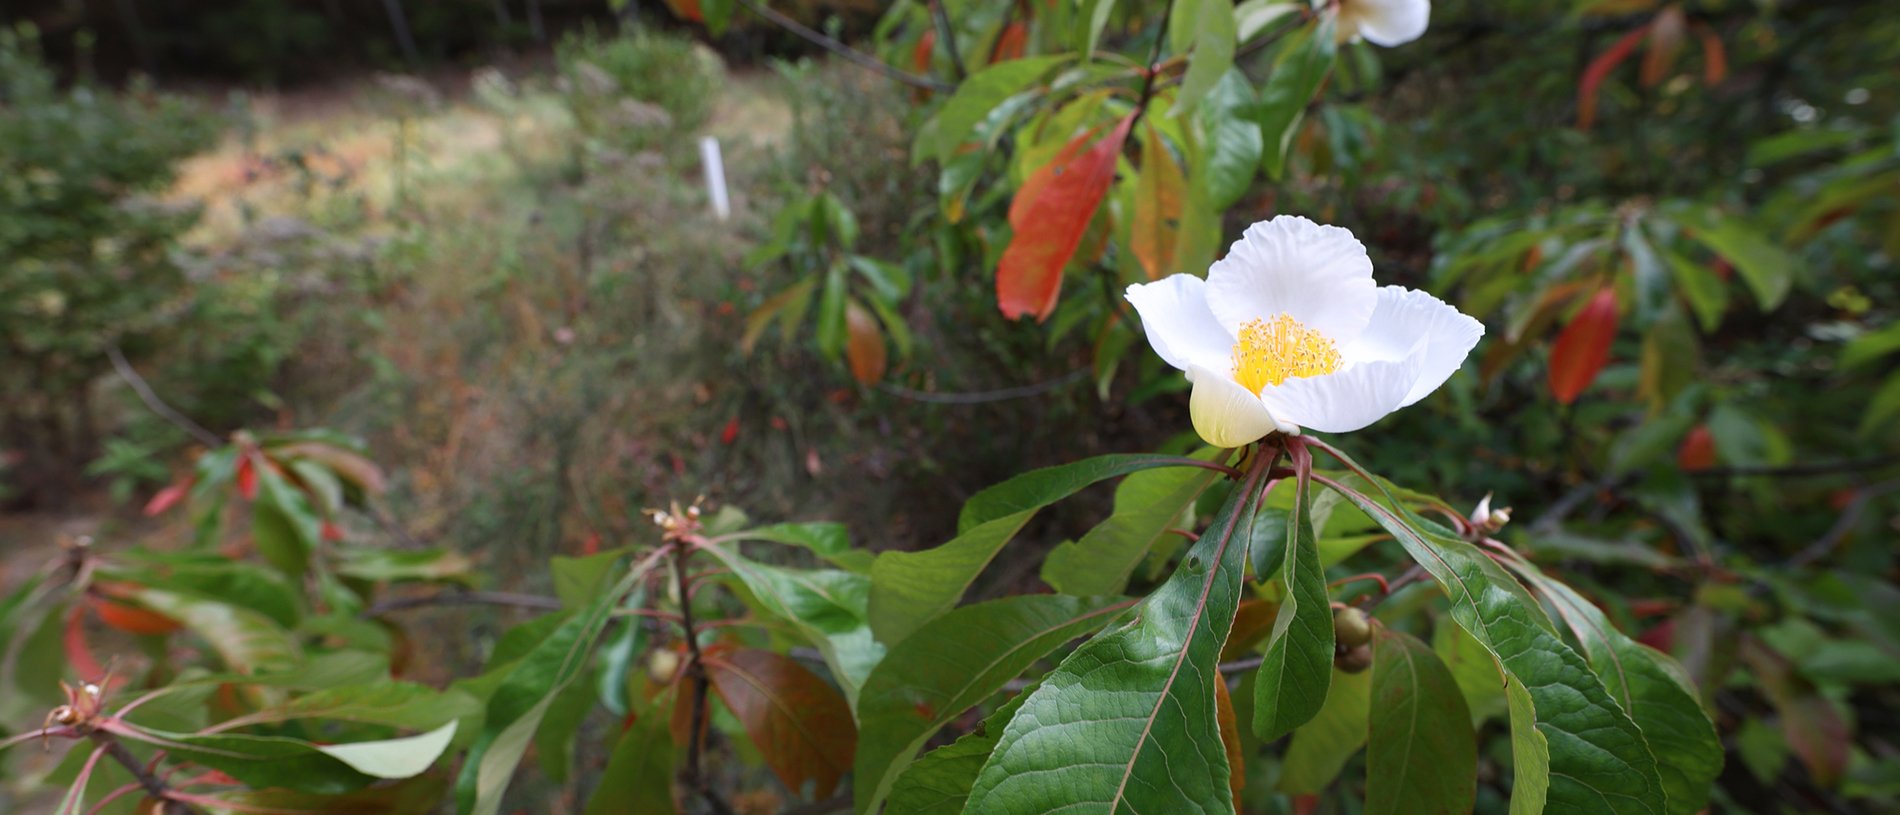 White bloom of the rare Franklinia tree